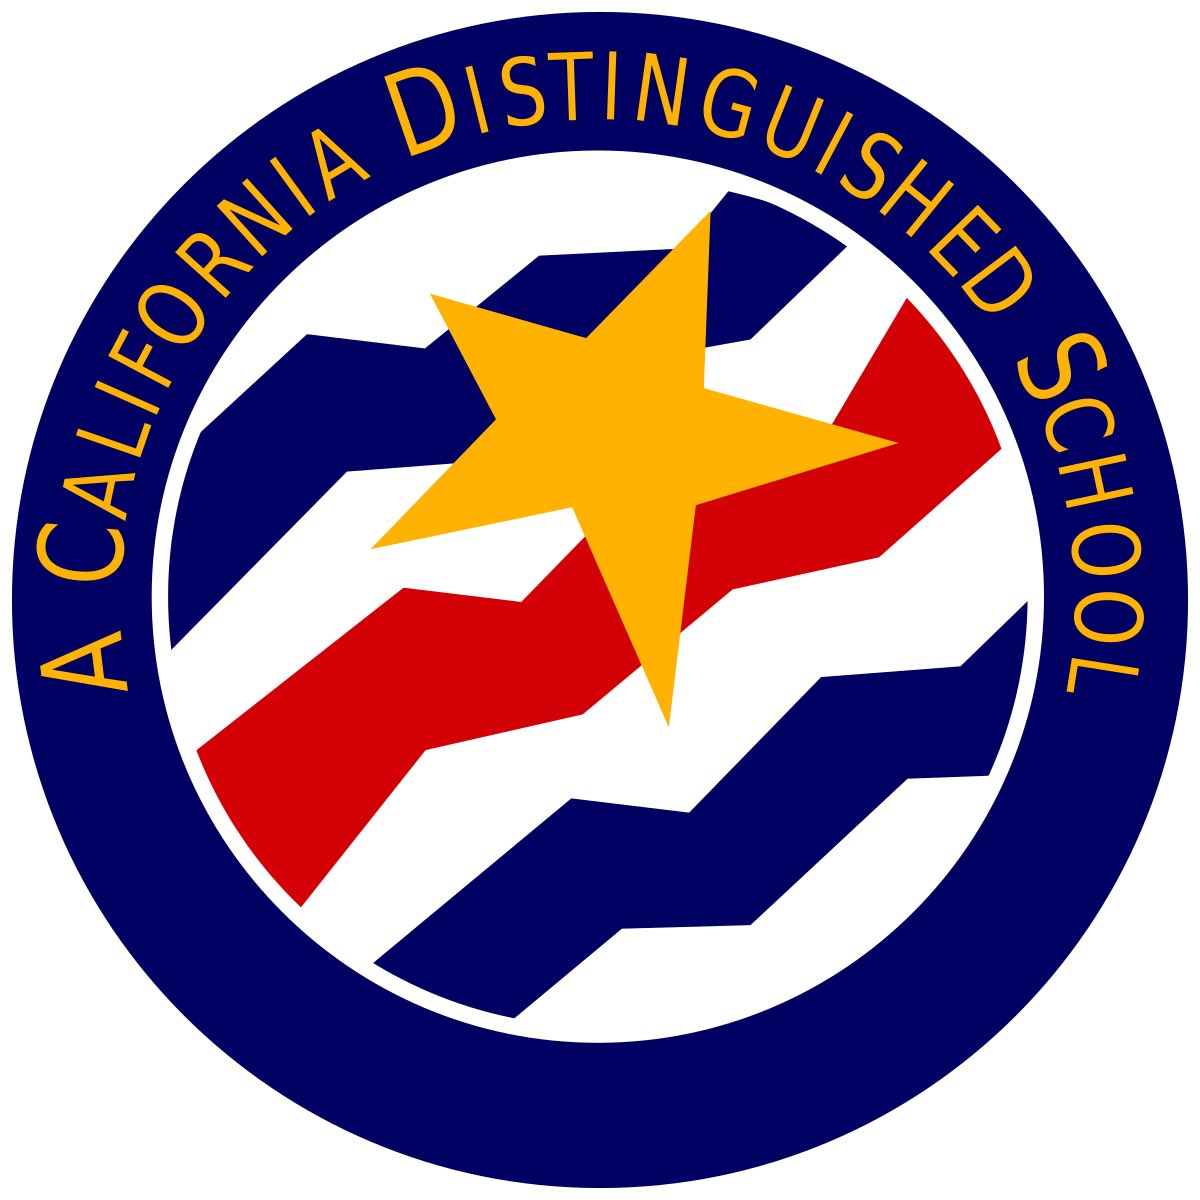 Congratulations to  #Cherrylee #Cleminson #Durfee #FrankWright and #LeGore for being recognized as a 2020 #CaliforniaDistinguishedSchool #EMCSD #FiveSchools!